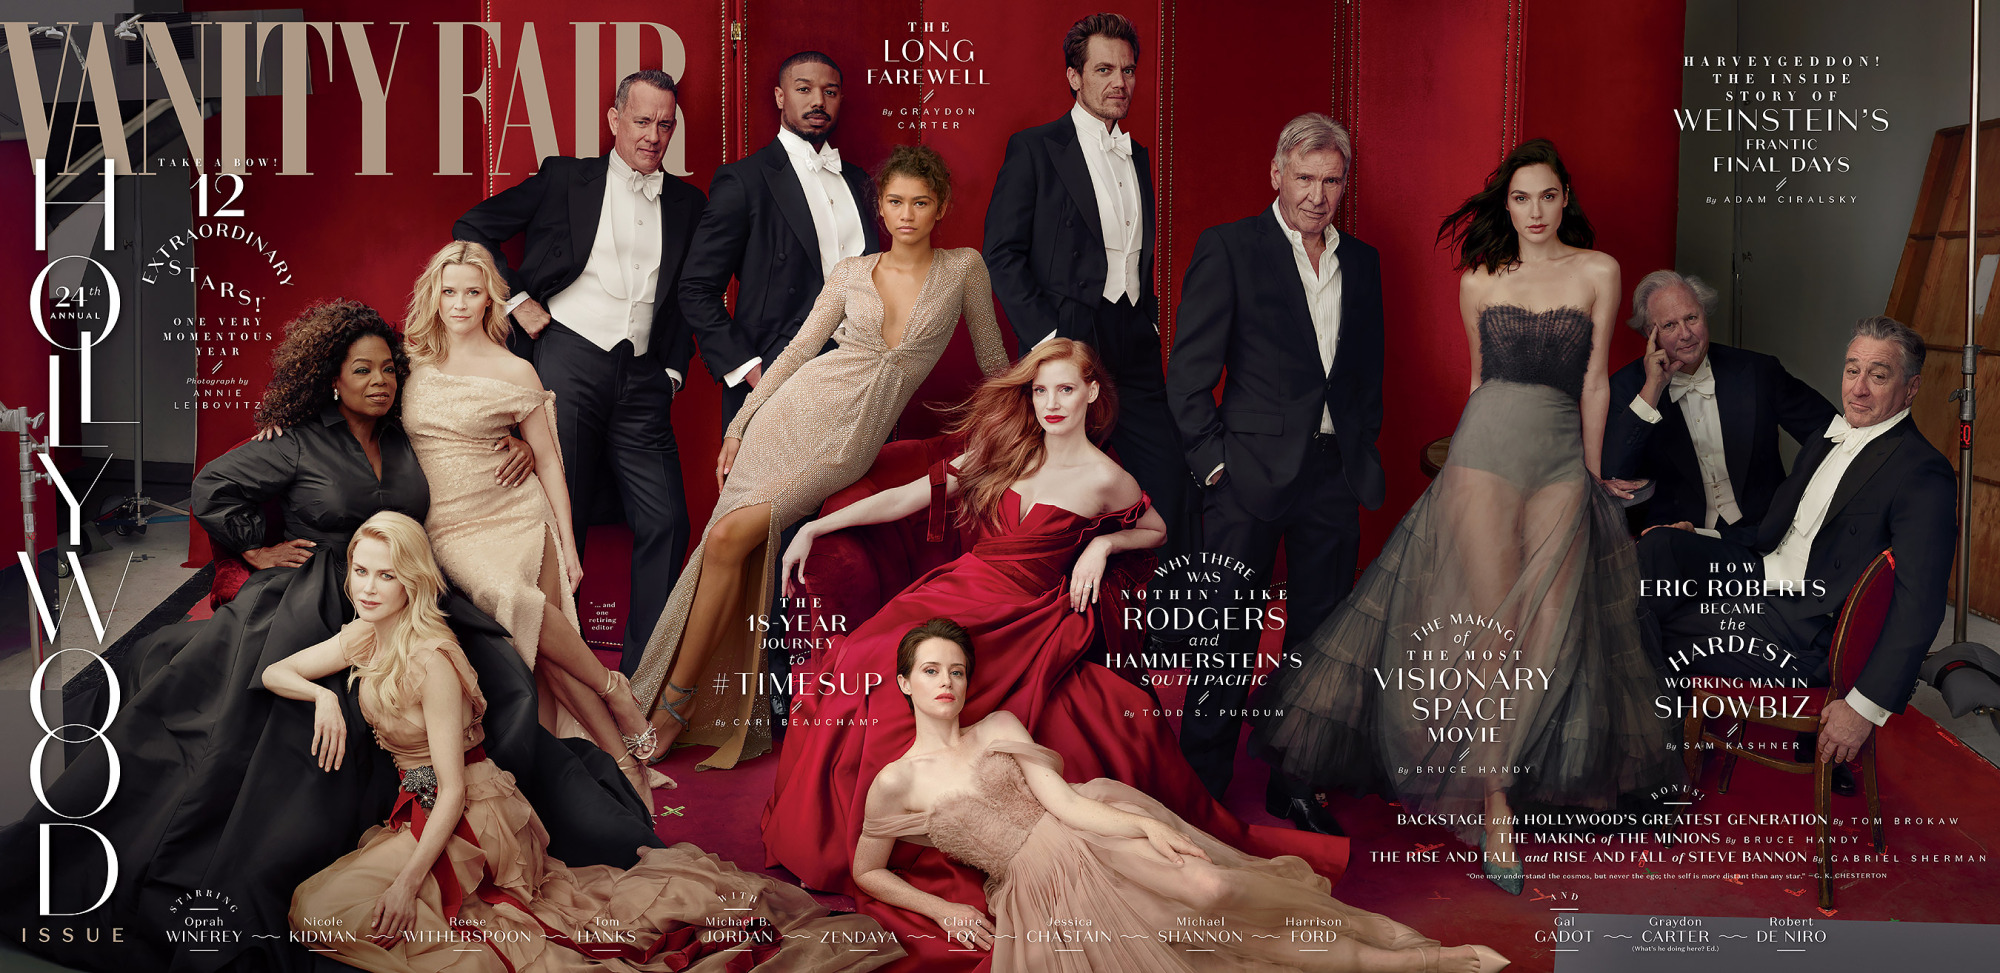 2018 Vanity Fair Hollywood Issue Cover